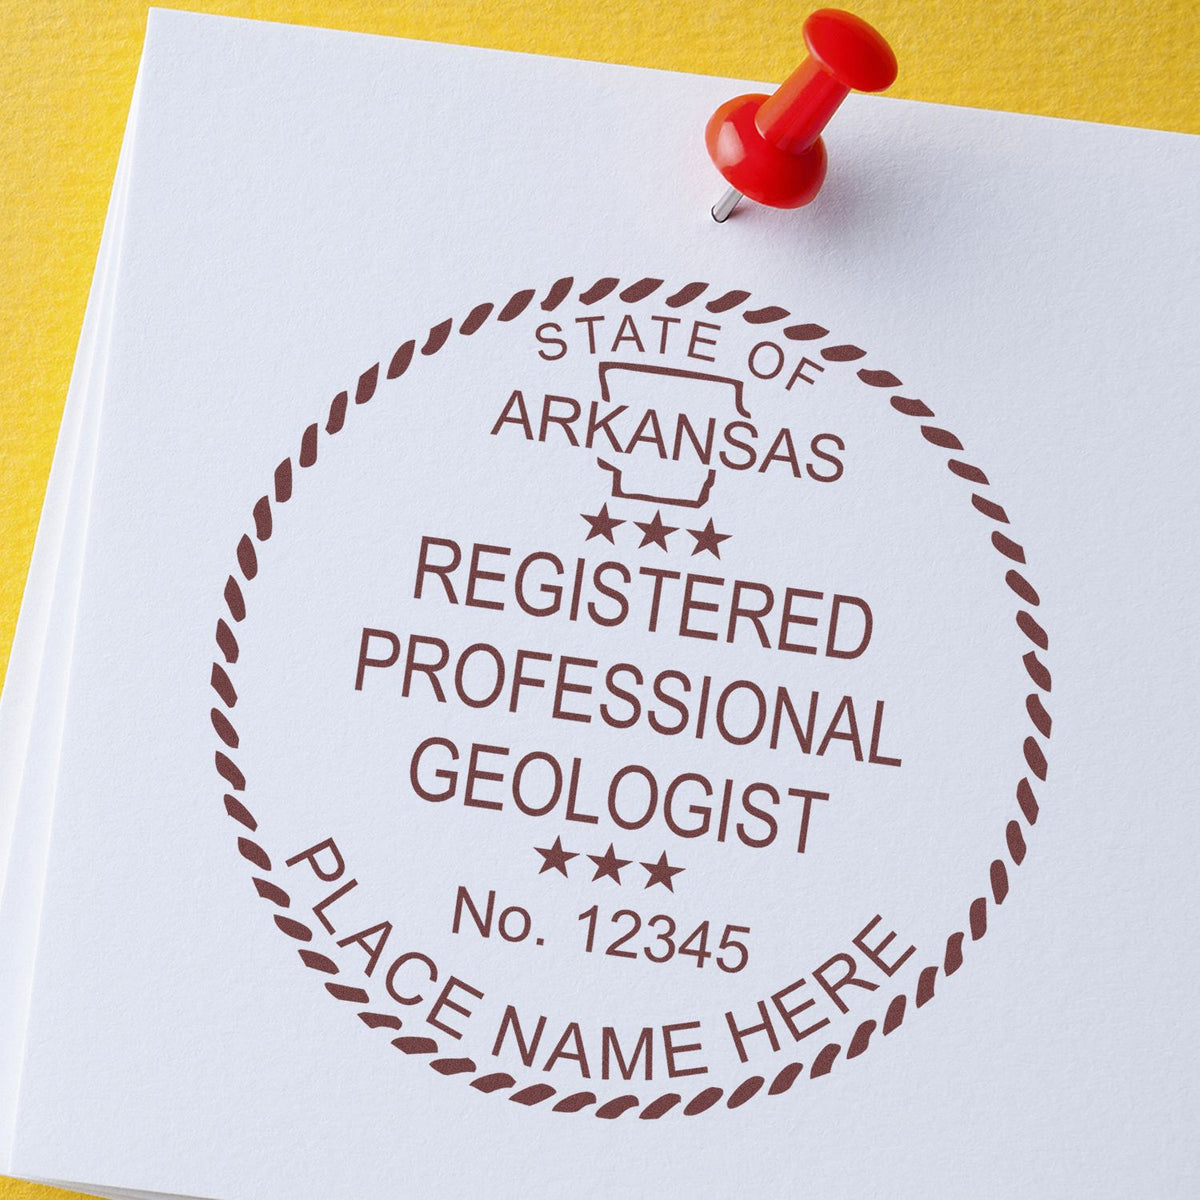 Another Example of a stamped impression of the Arkansas Professional Geologist Seal Stamp on a office form